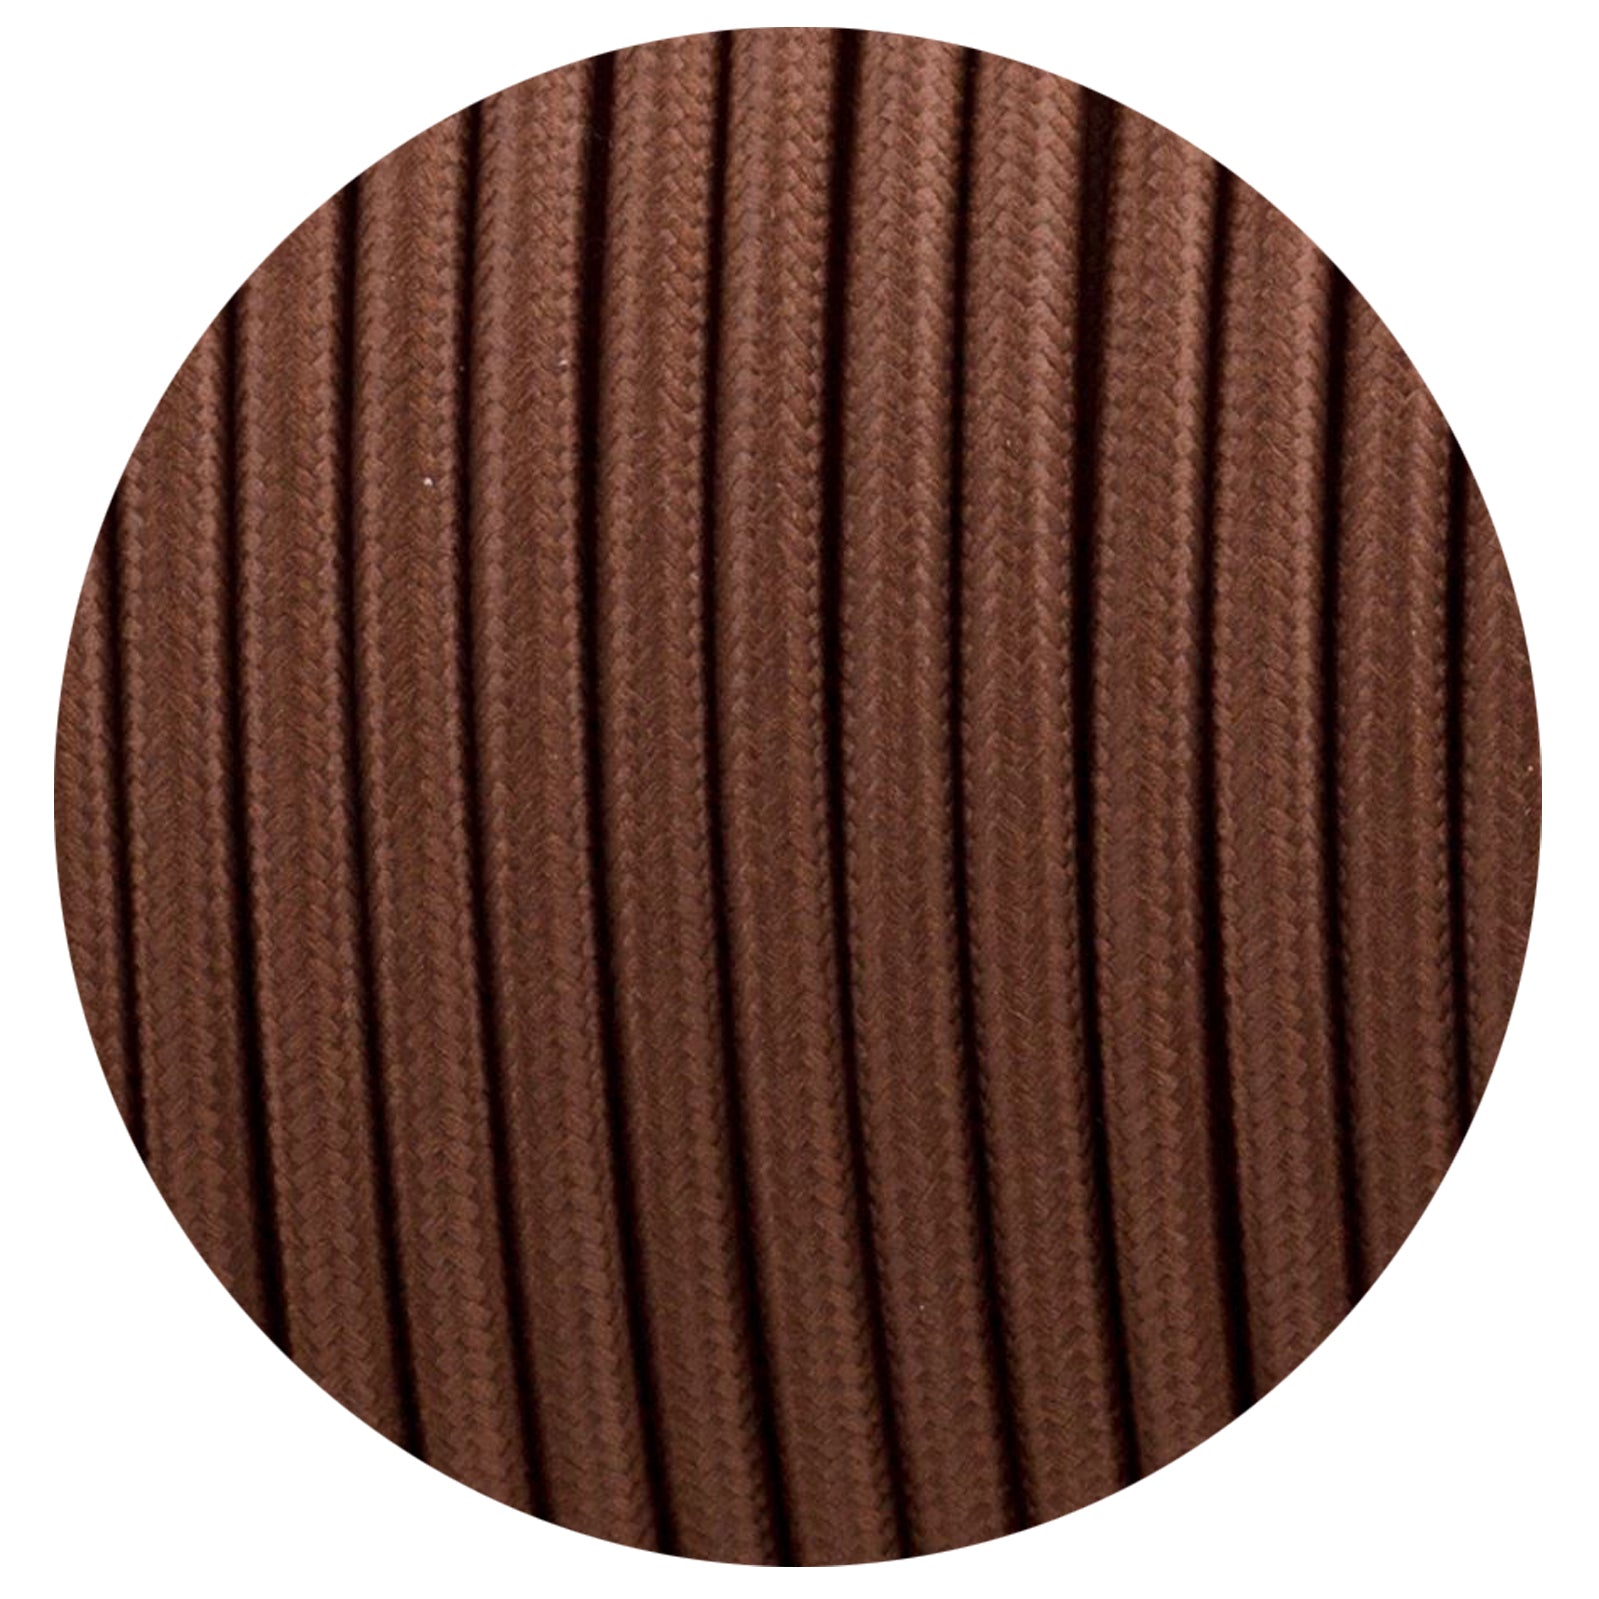 18 Gauge 3 Conductor Round Cloth Covered Wire Braided Light Cord Brown